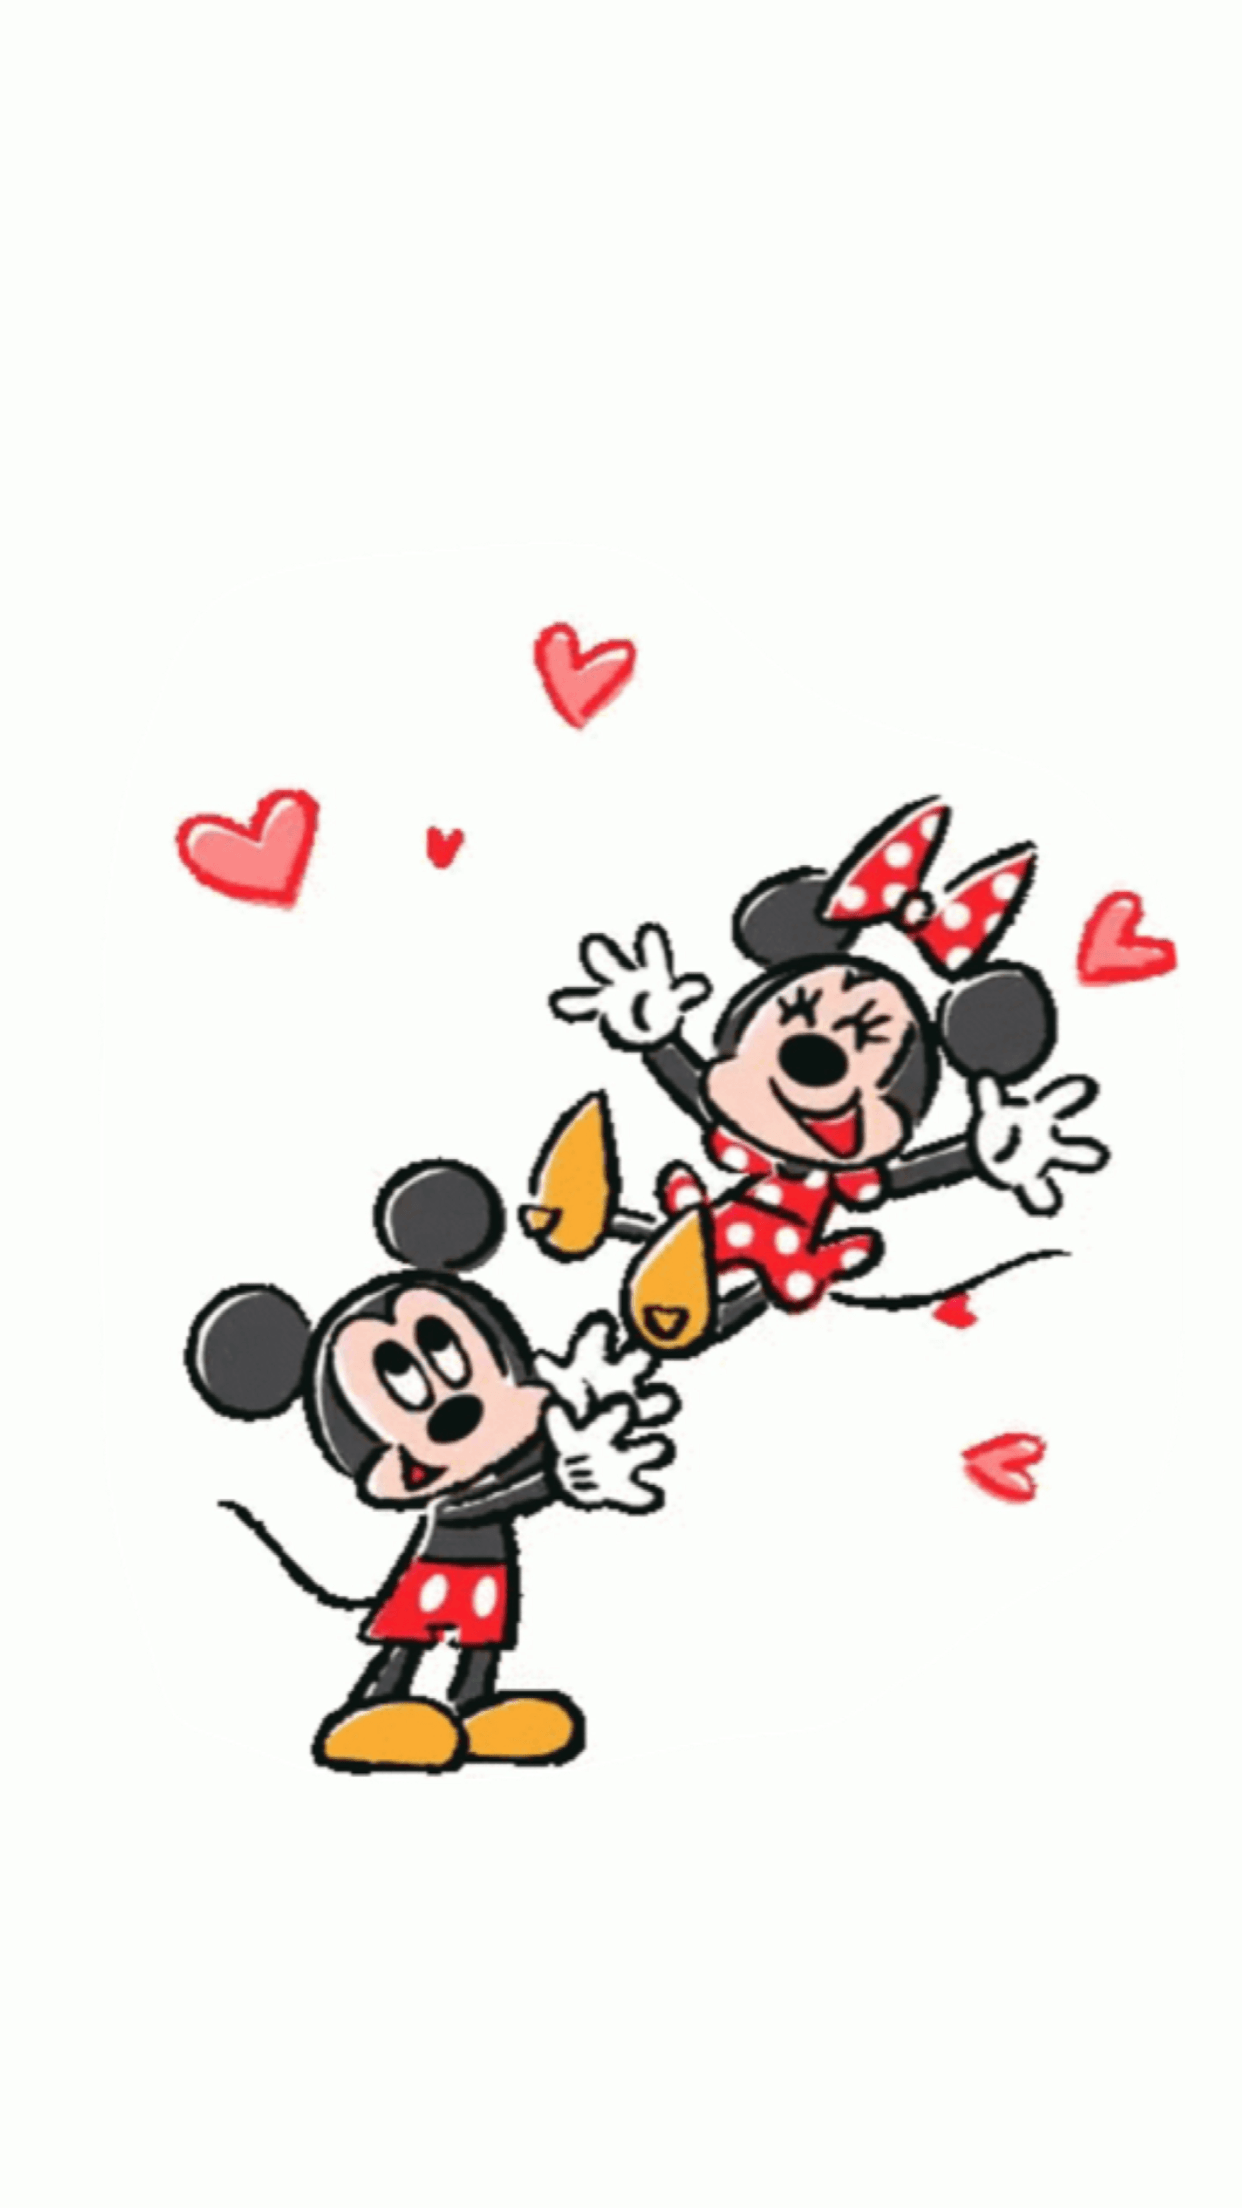 A cartoon of mickey and minnie mouse with hearts - Mickey Mouse, Minnie Mouse